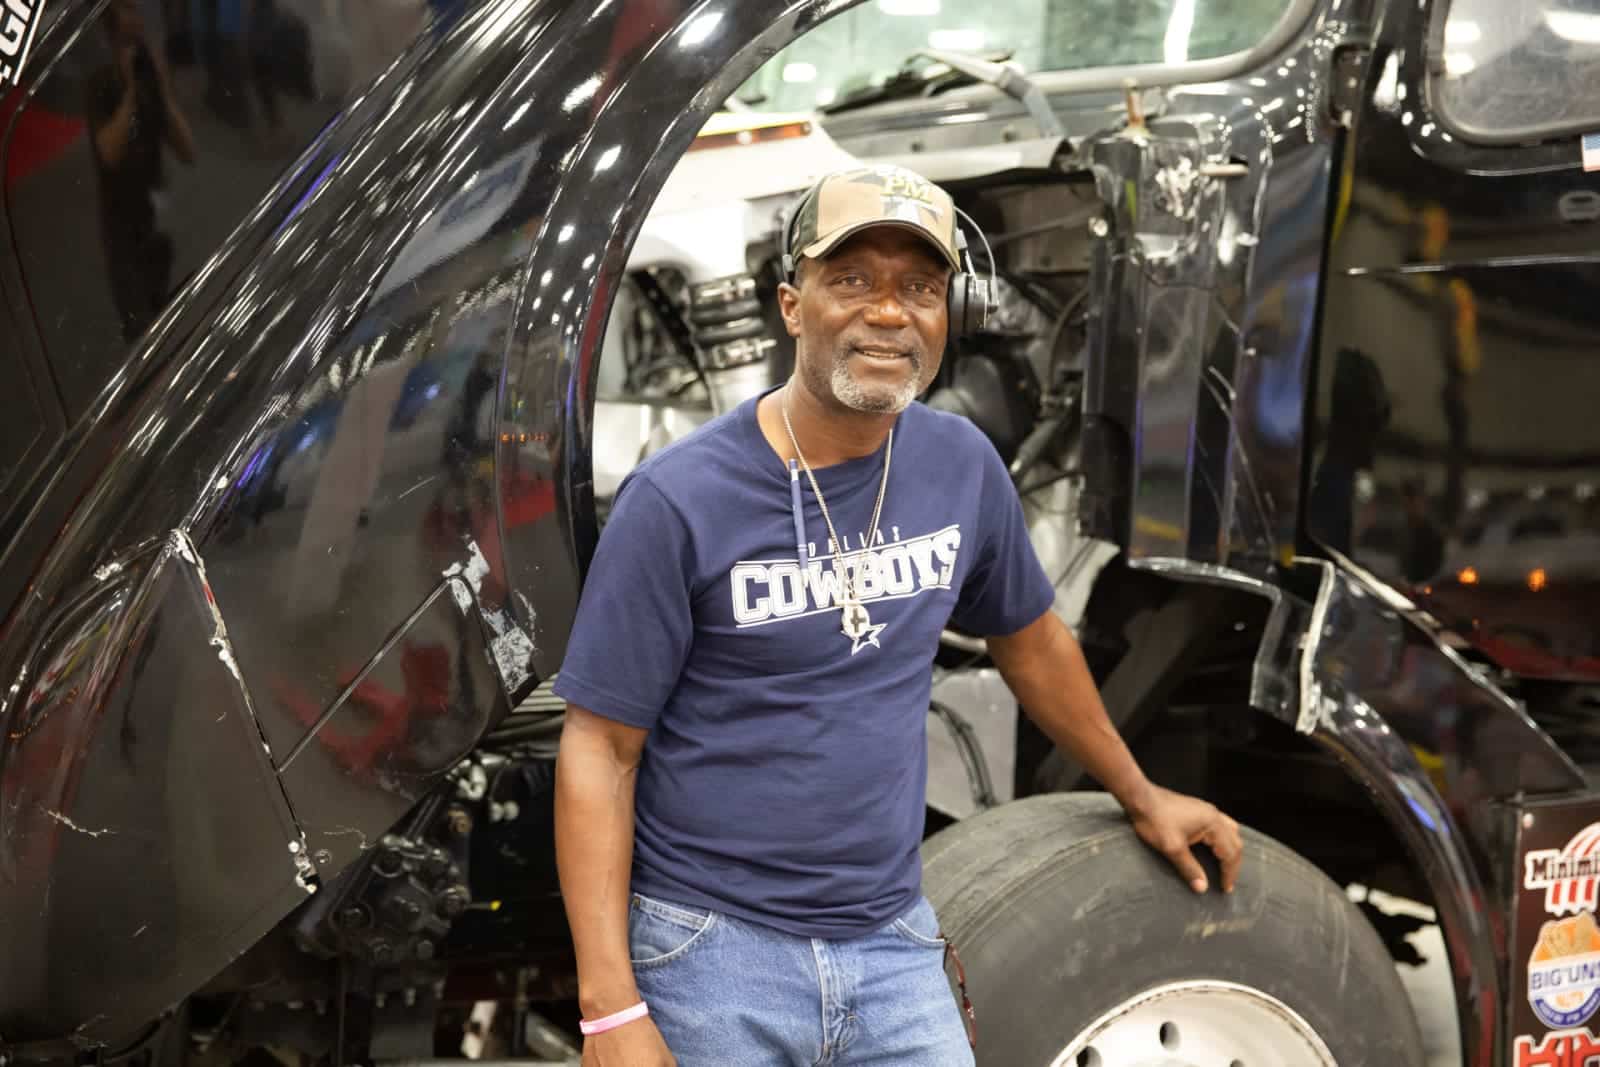 3rd-generation truck driver shares passion for trucking and Powerloop